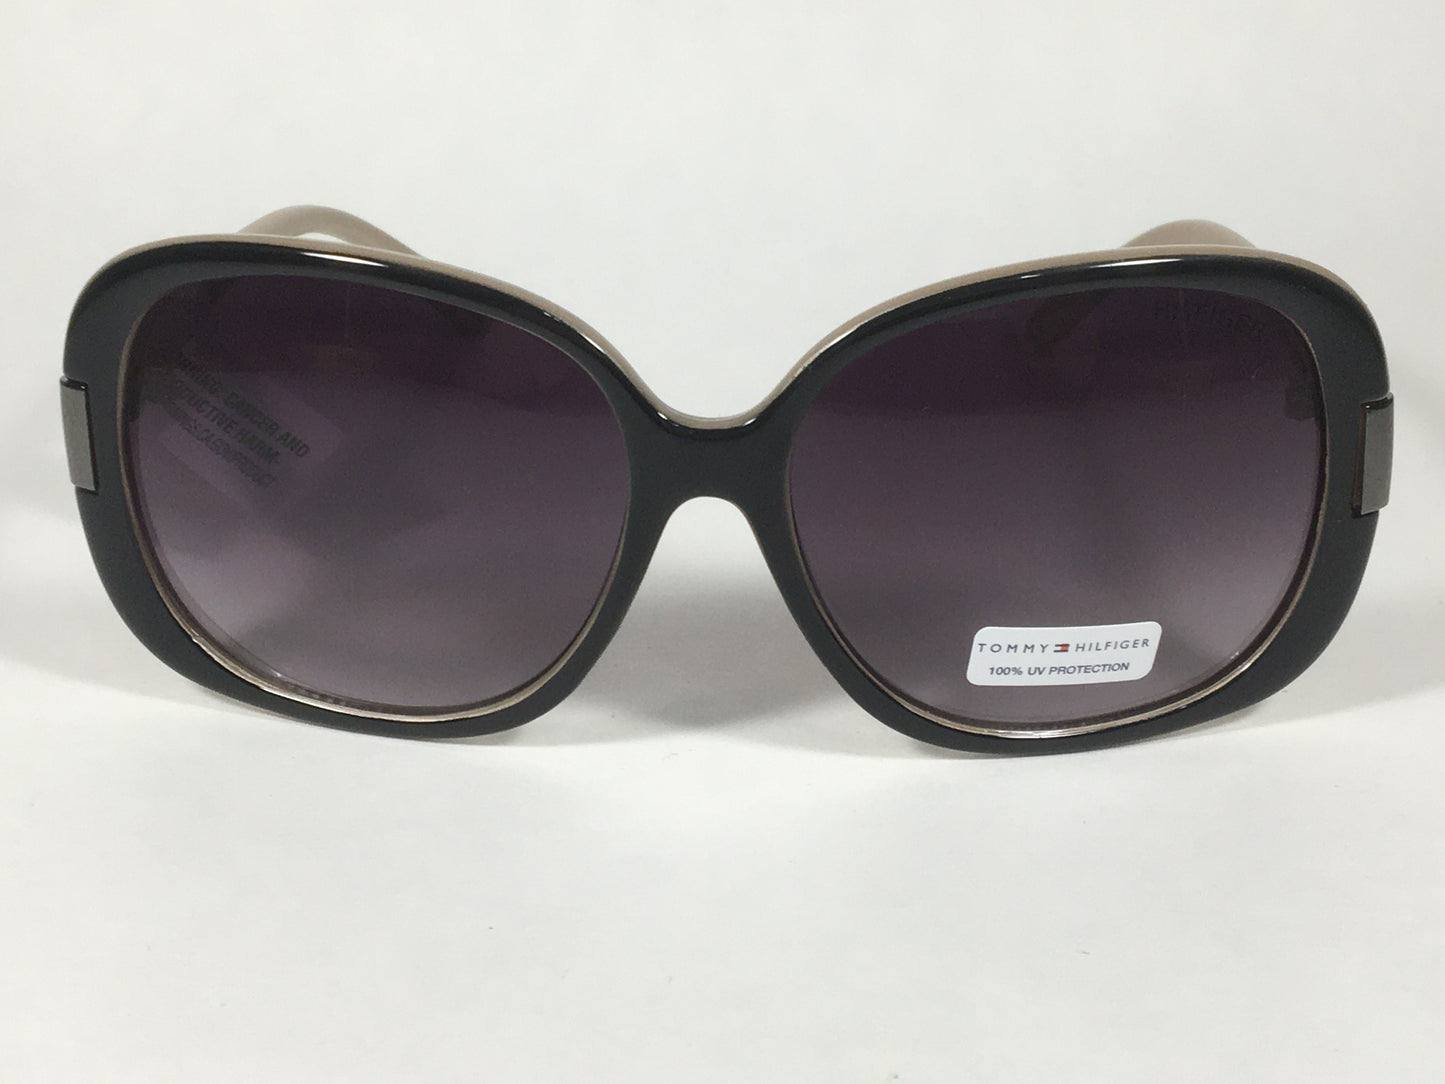 Tommy Hilfiger Janet Large Oval Sunglasses Two Tone Black And Tan Frame Gray Gradient Lens JANET WP OL90 - Sunglasses